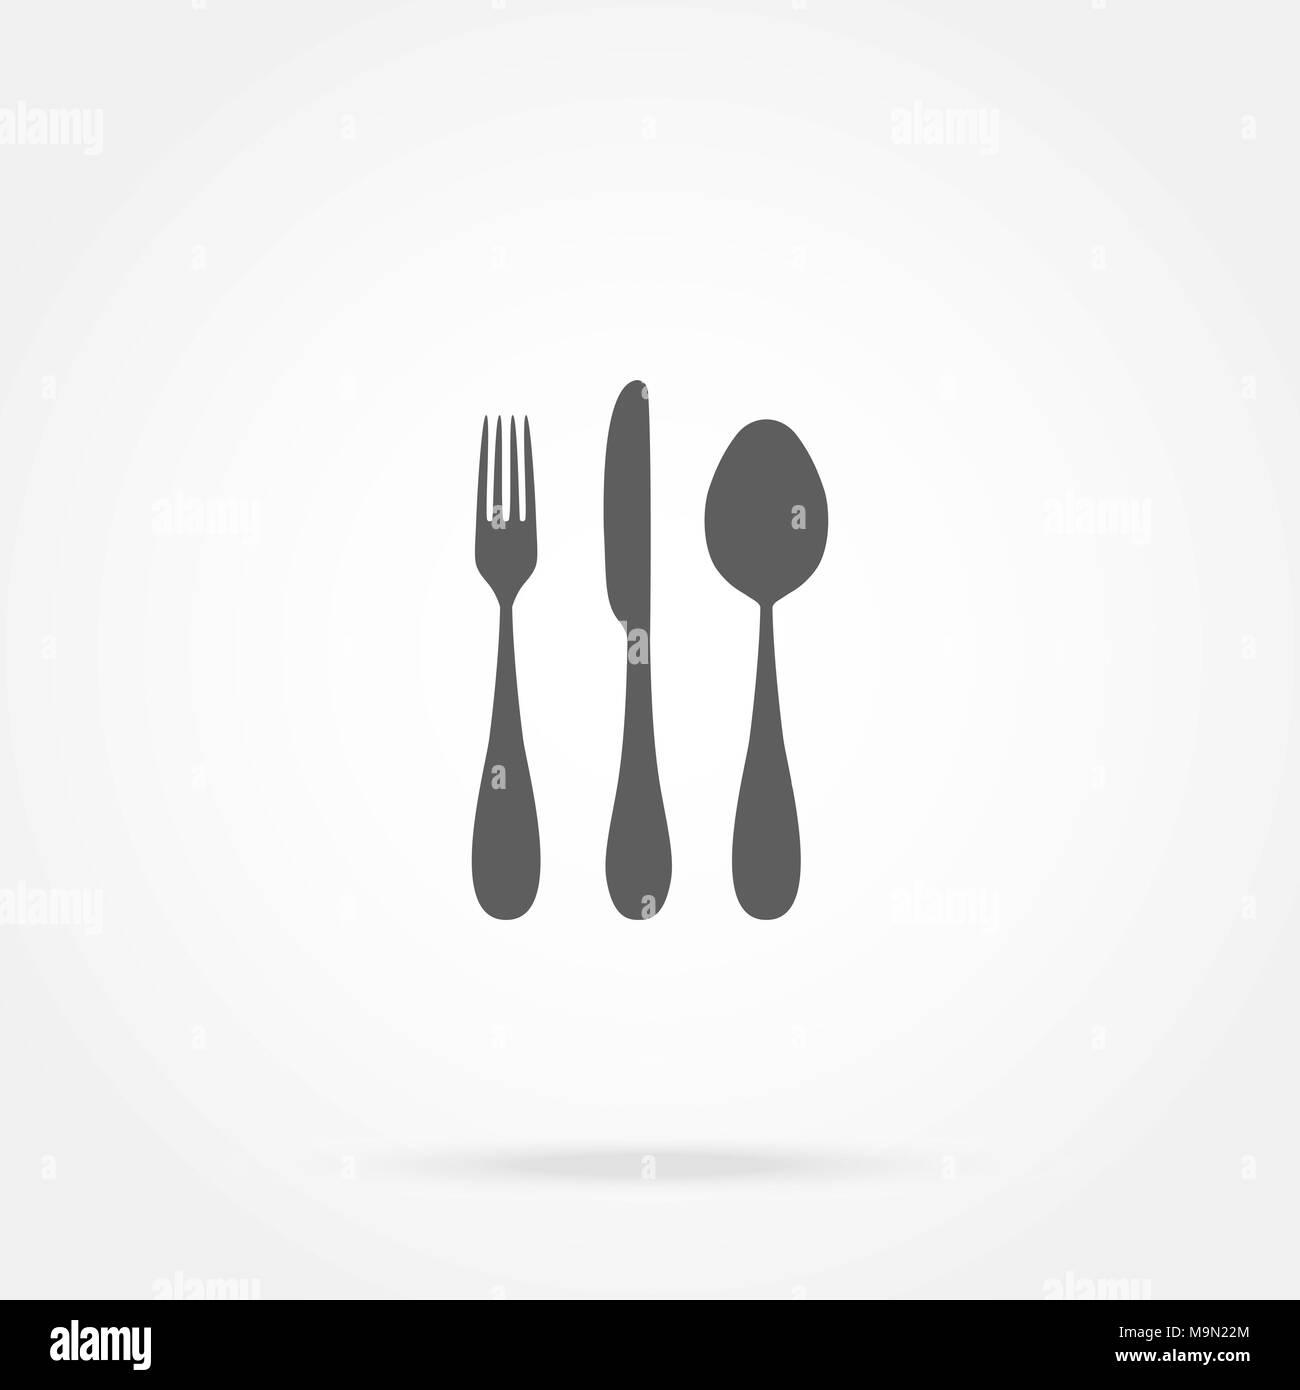 cutlery icon (spoon, fork, knife)  Stock Vector